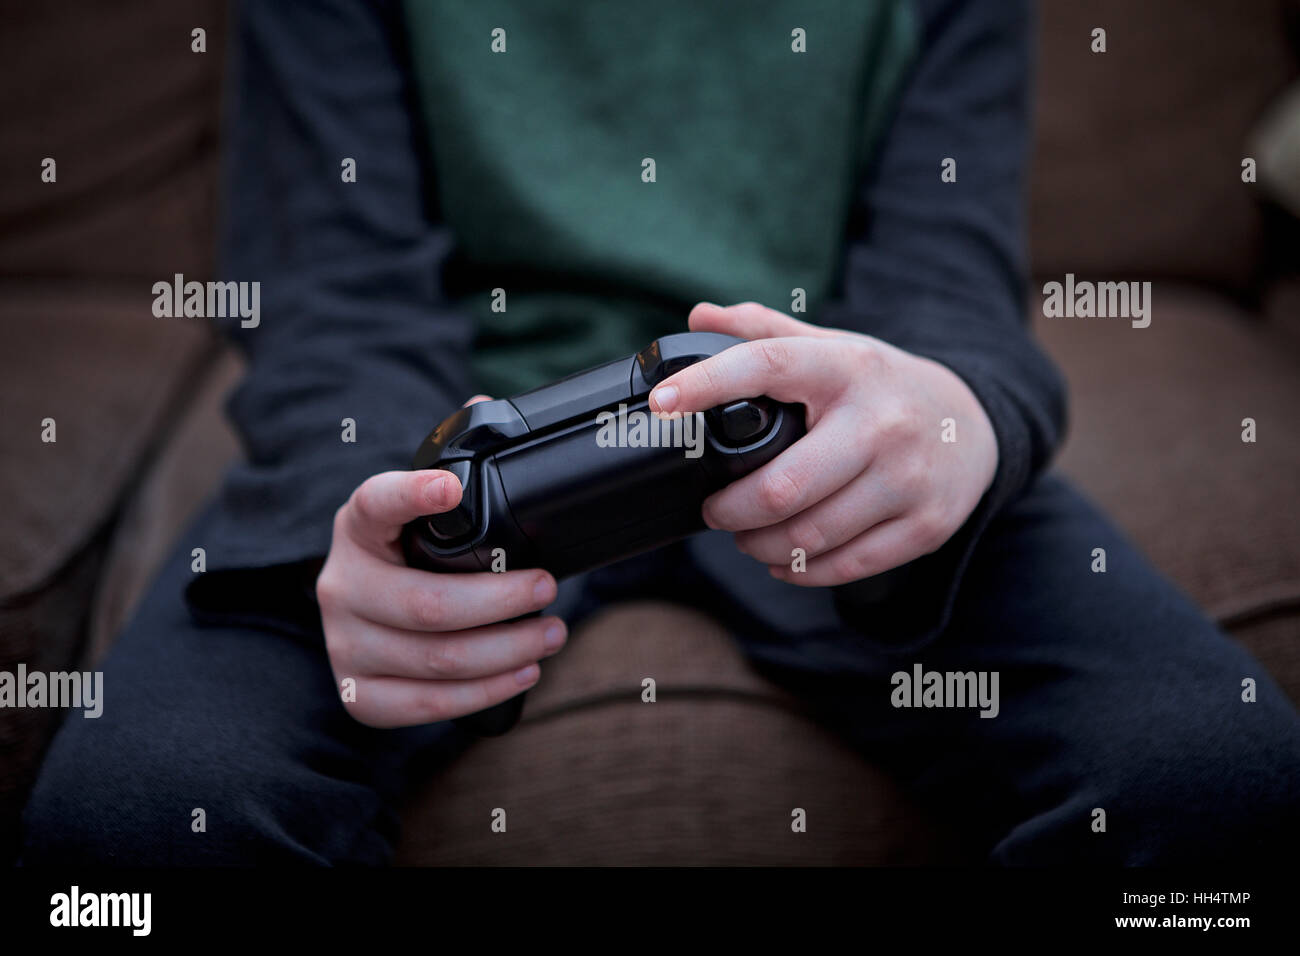 Close-up of a young boy holding video game controller. Stock Photo